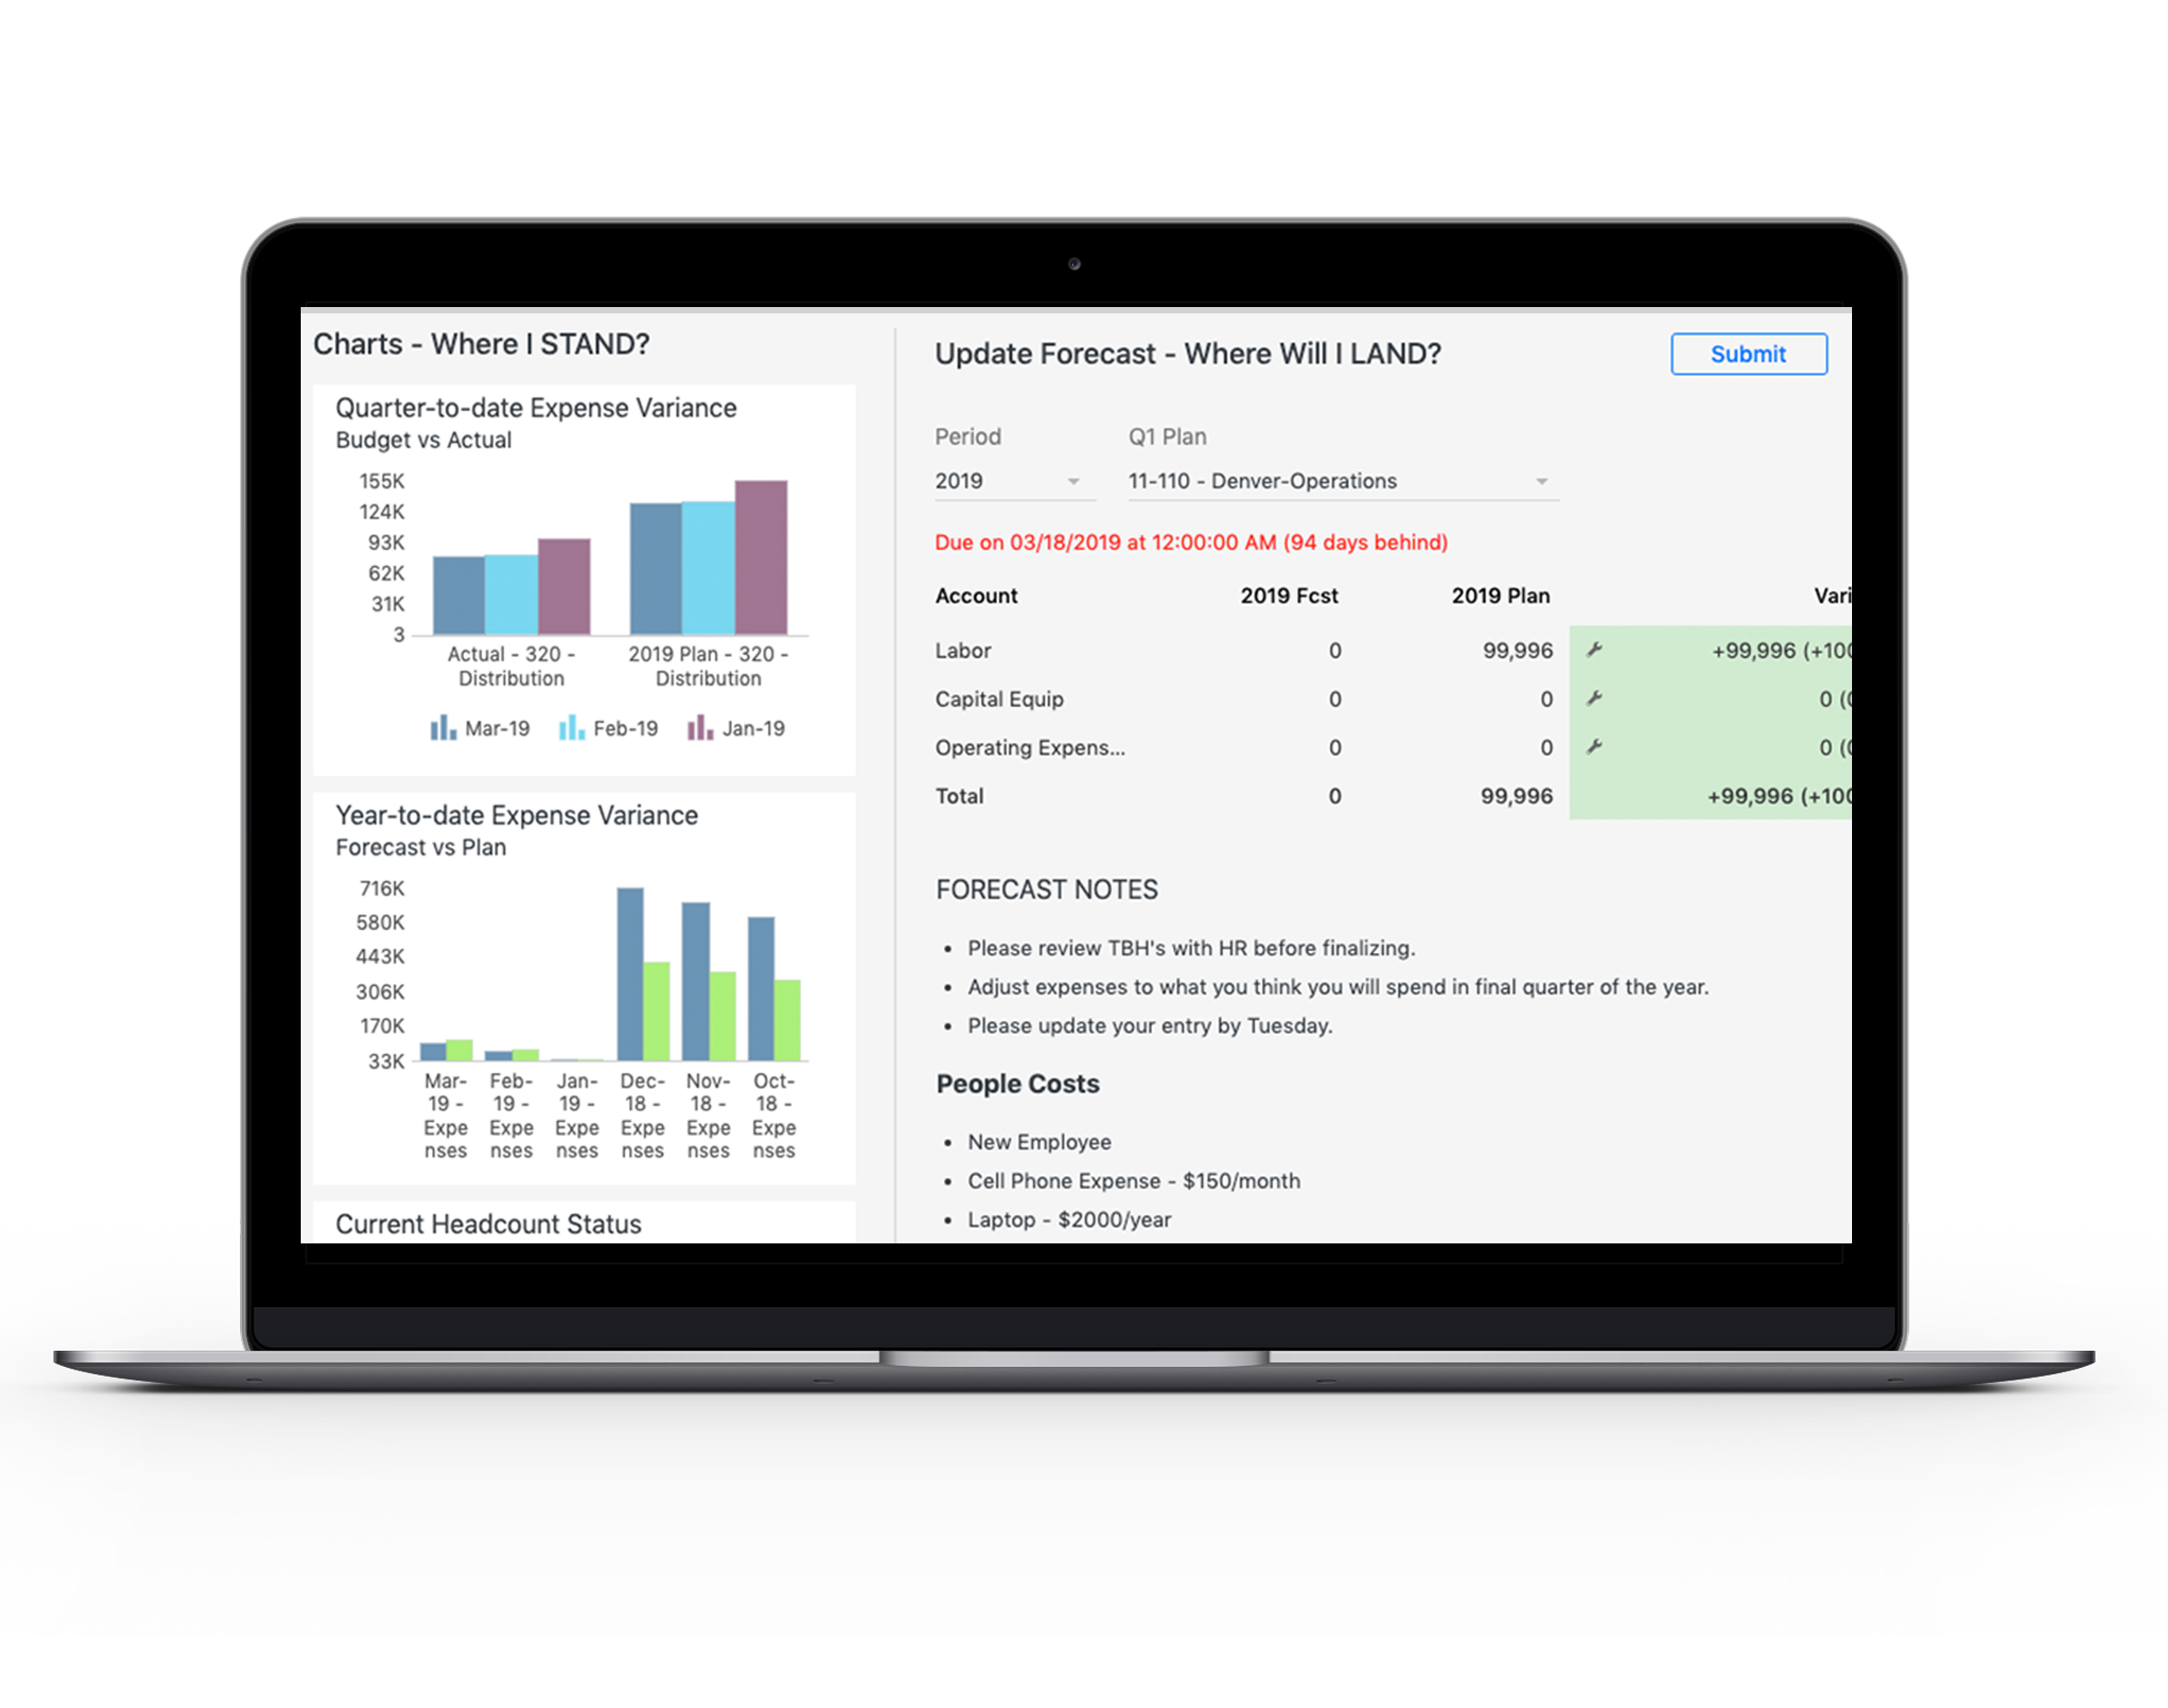 MyPlan is an easy-to-use interface designed specifically for budget owners to quickly plan, budget and forecast.